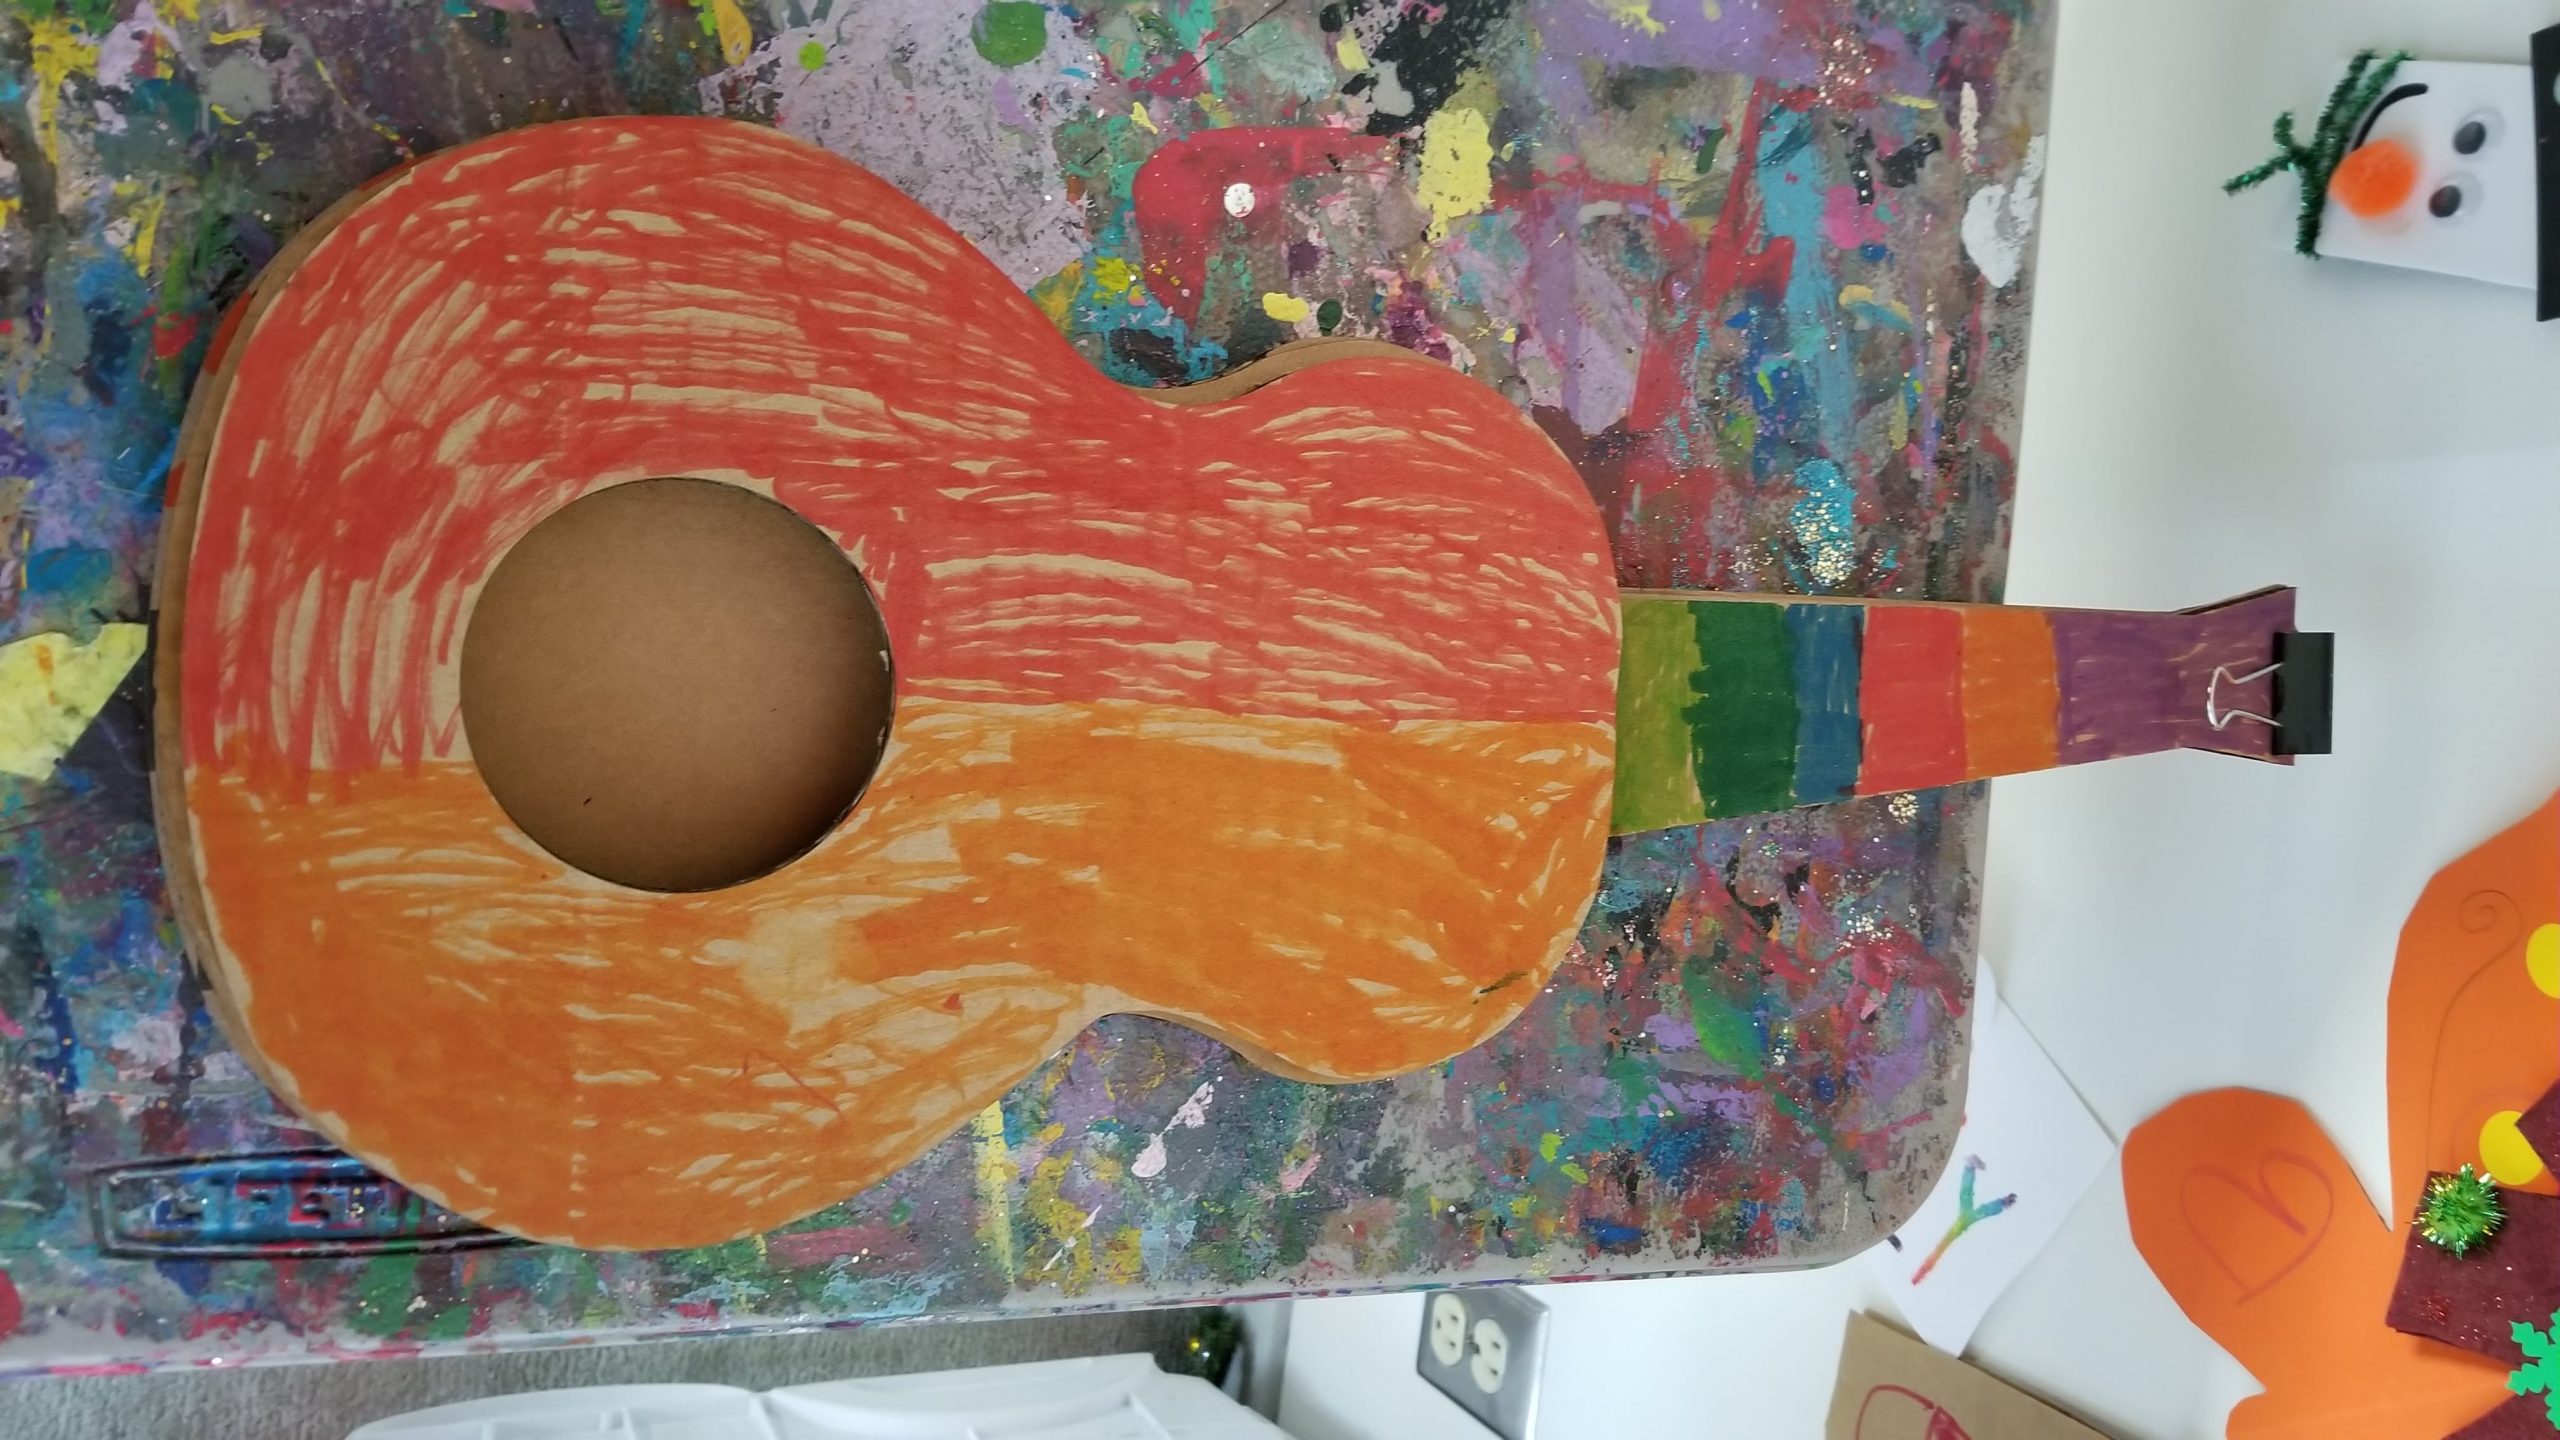 Photo of a cardboard ukulele colored with several colors of marker by a day camper.